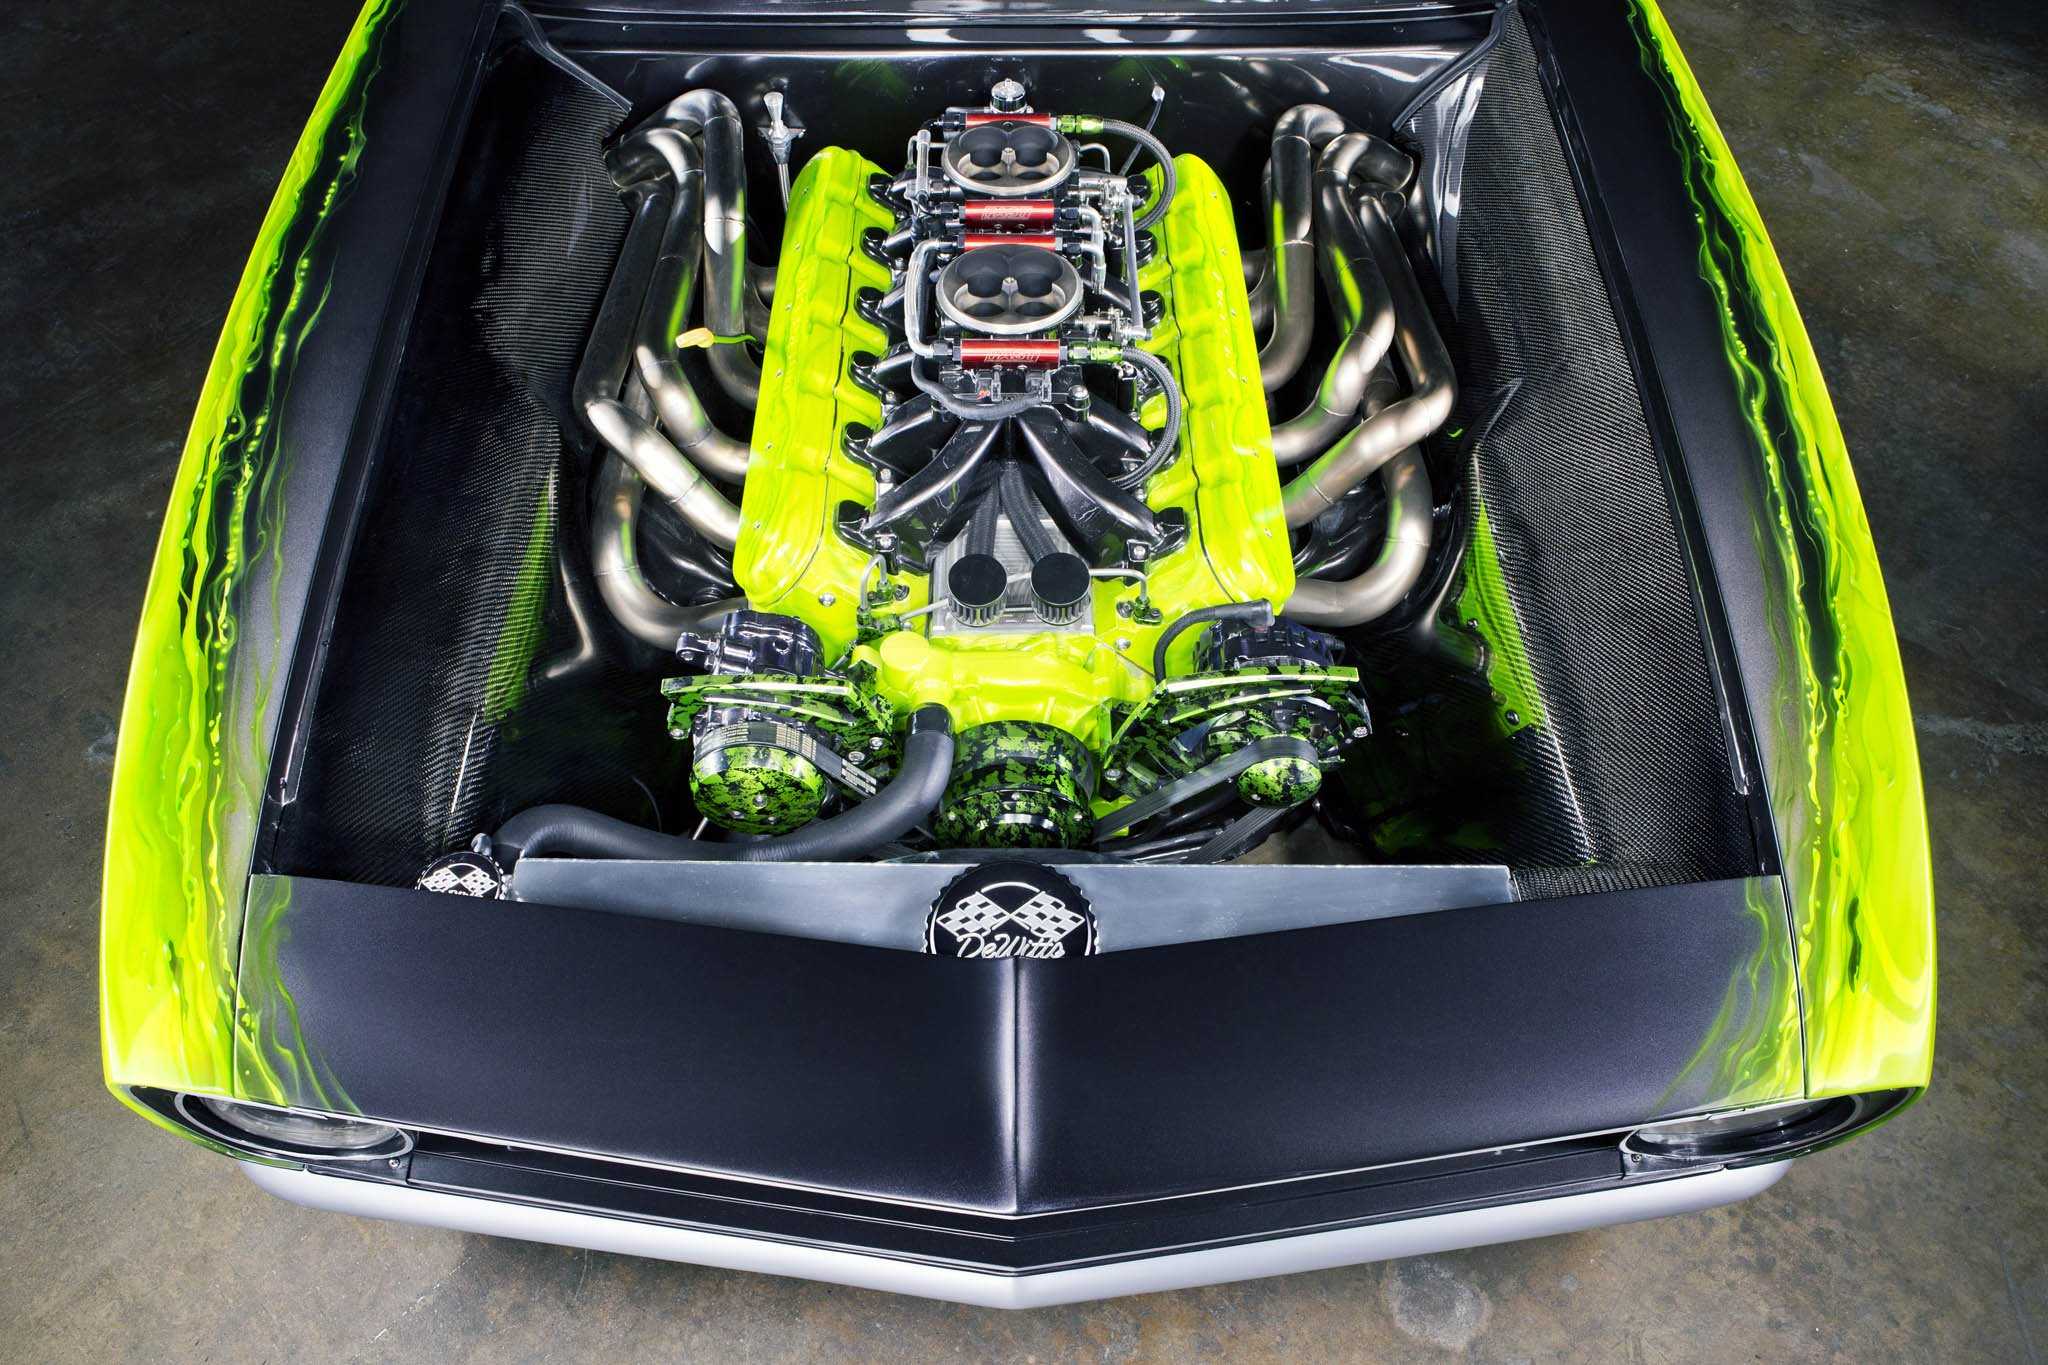 Meet The World's Only V12, LS-Powered Camaro